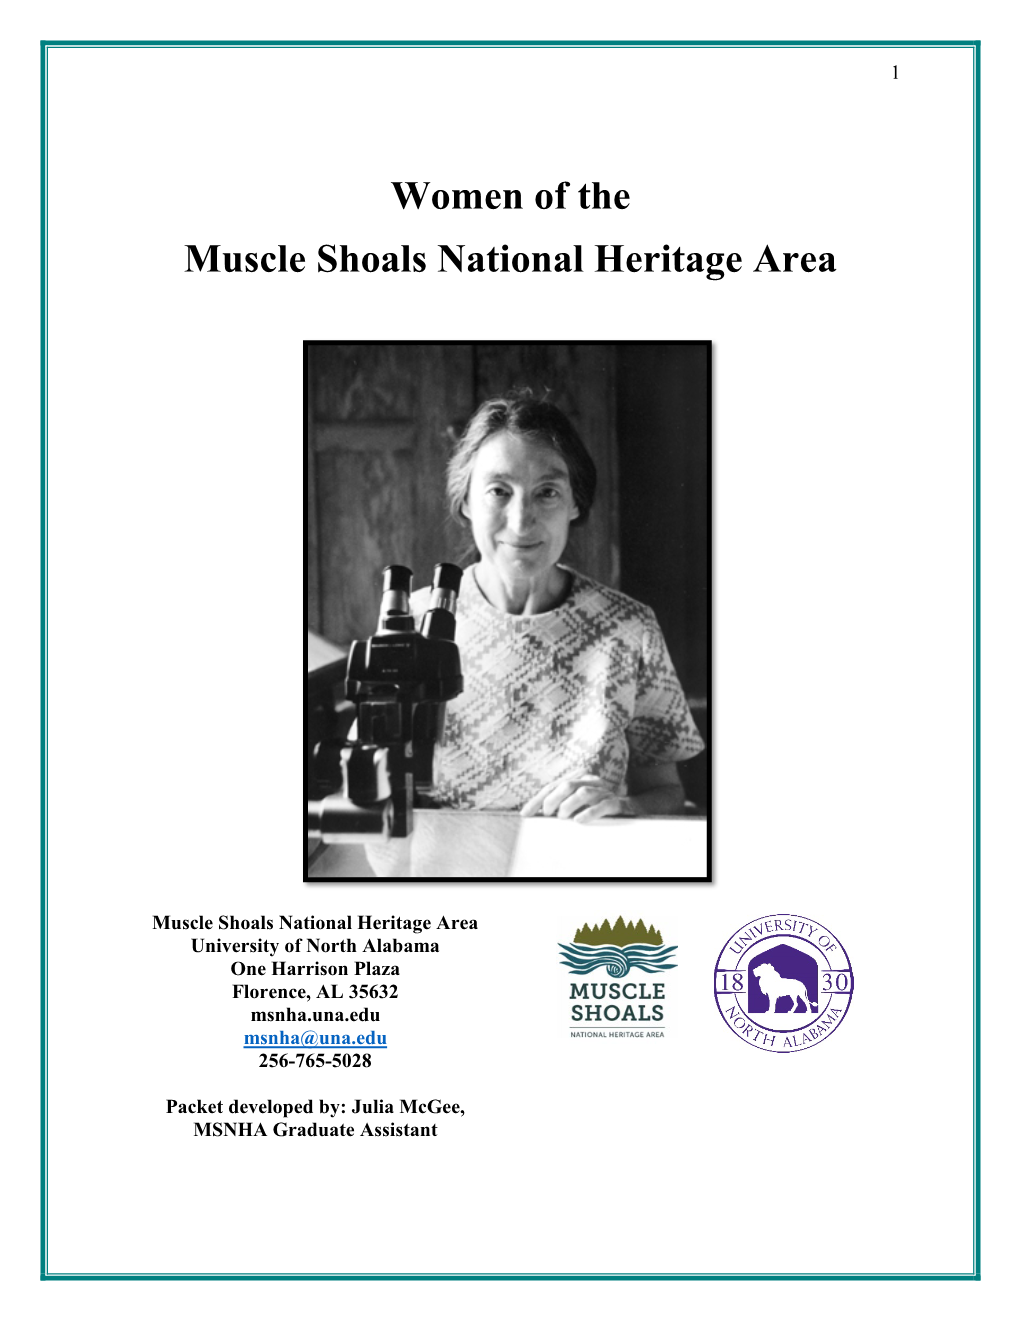 Women of the Muscle Shoals National Heritage Area